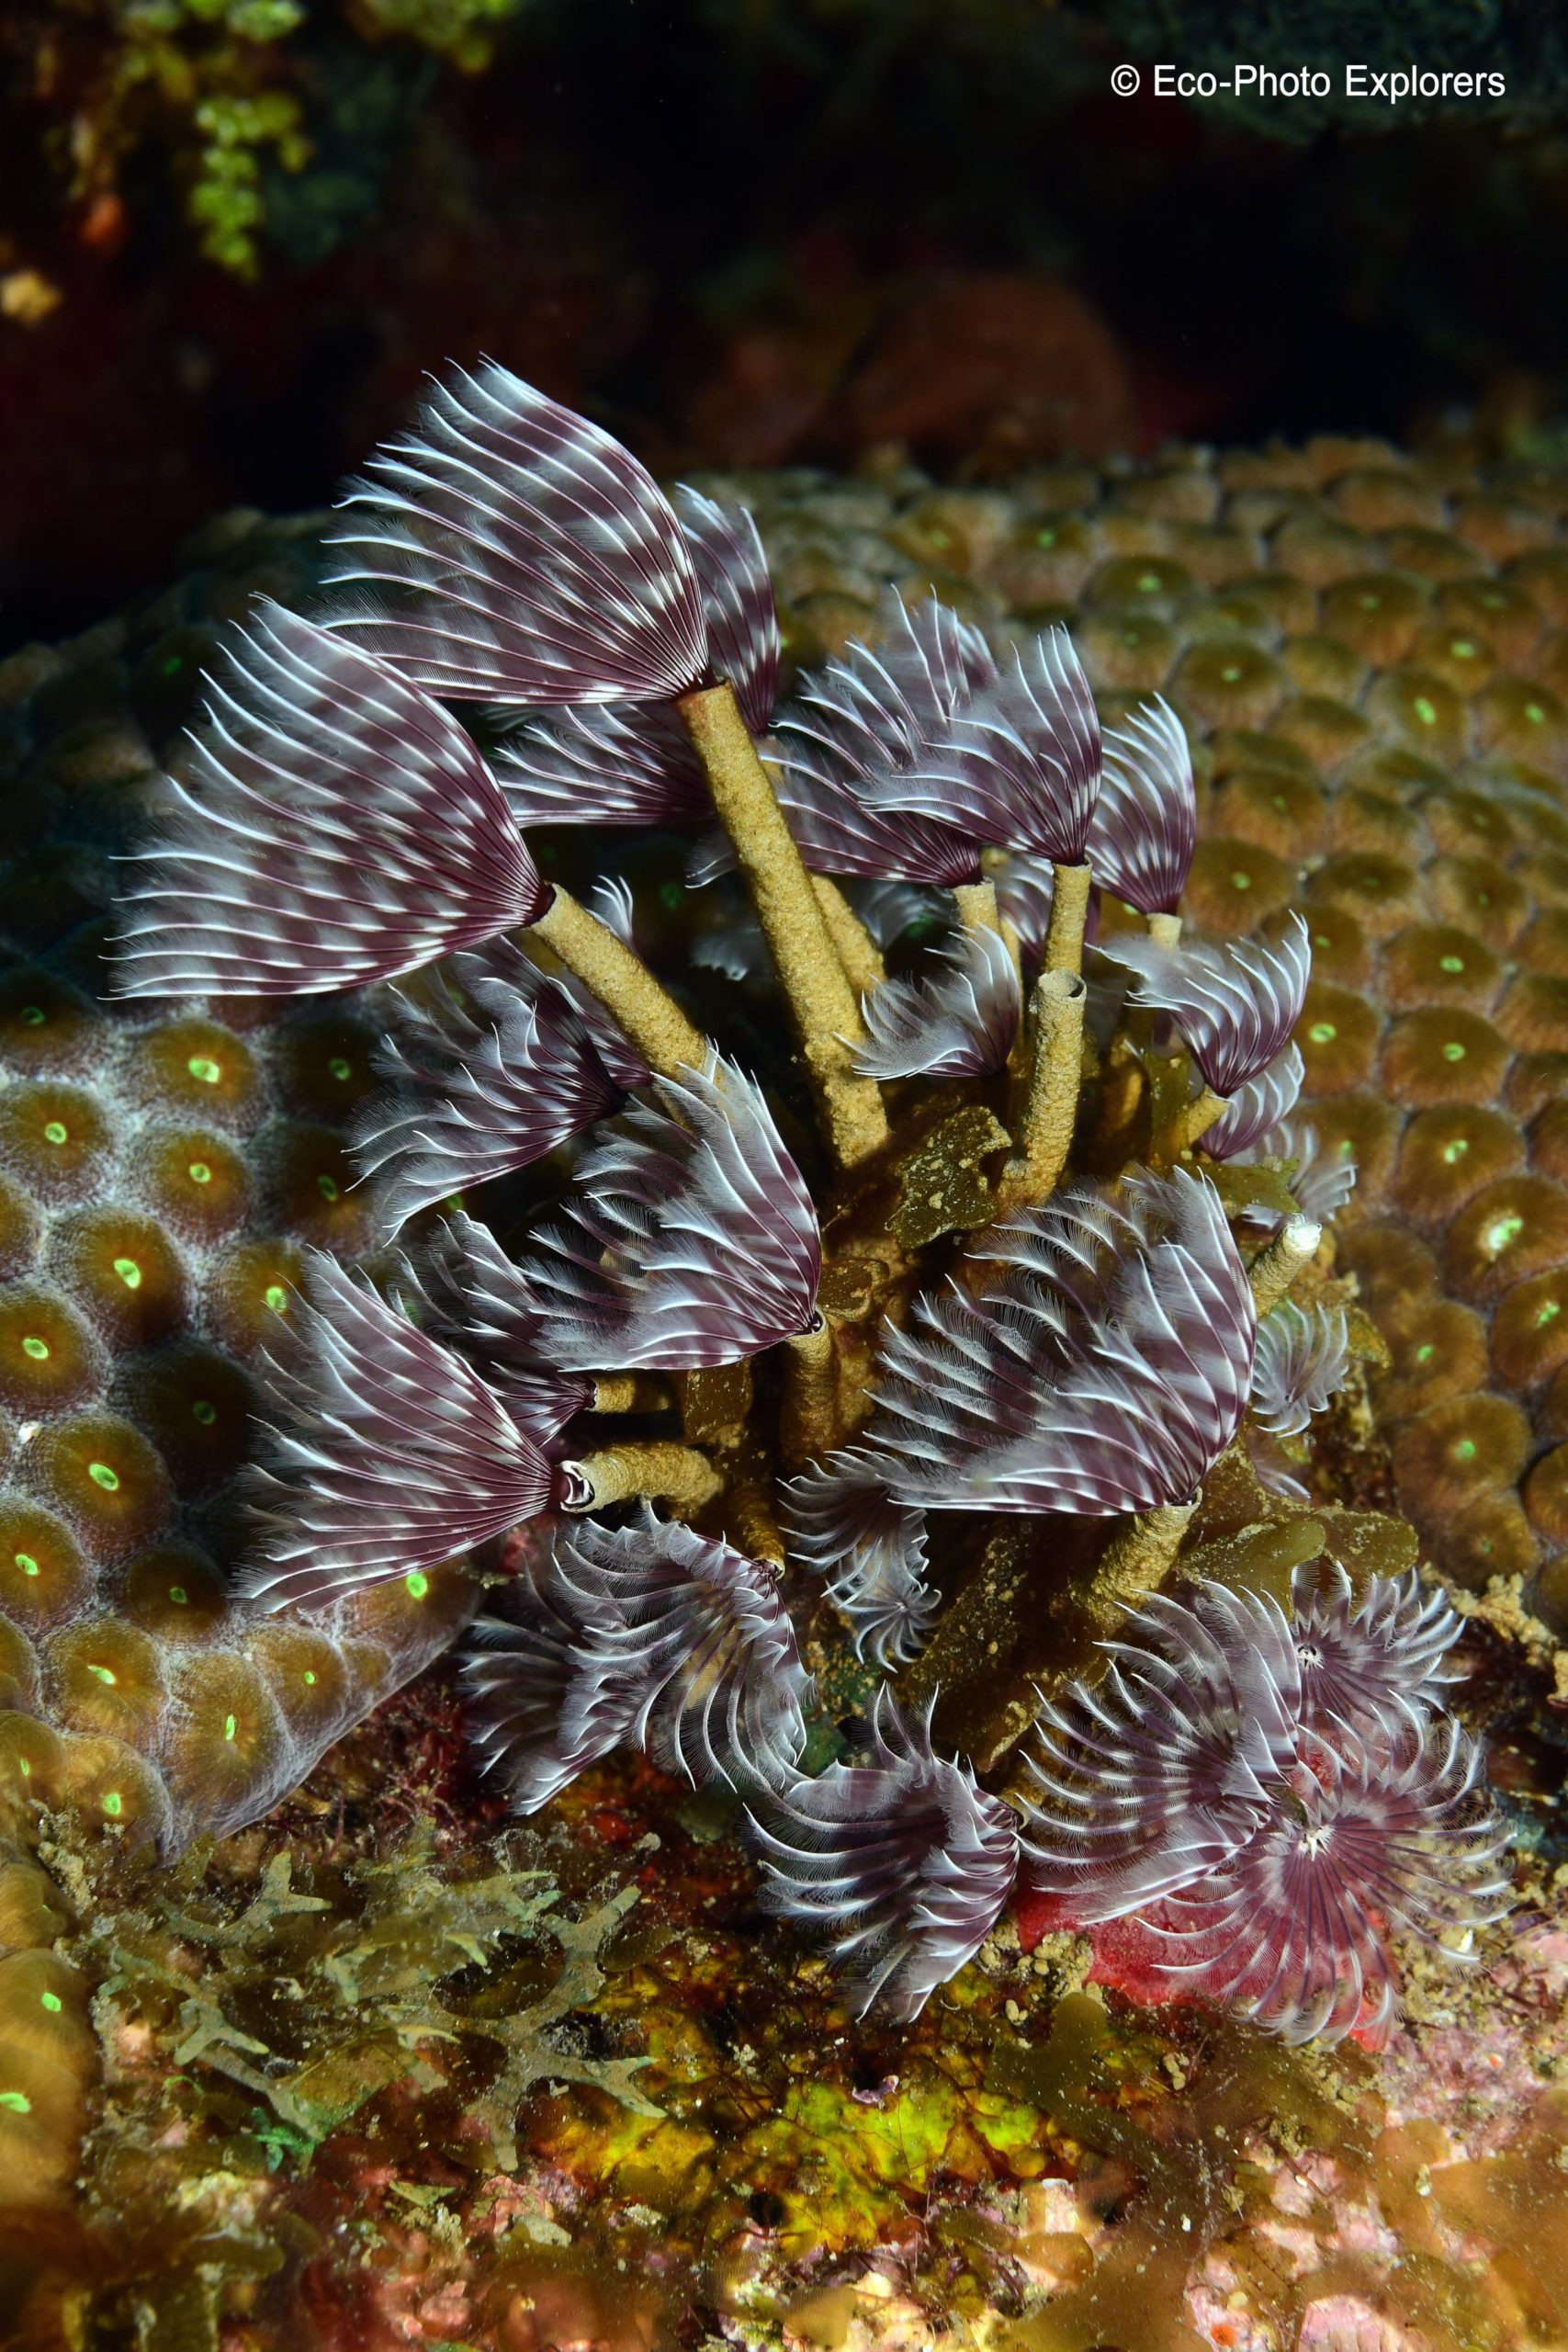 A cluster of Feather Duster Worms